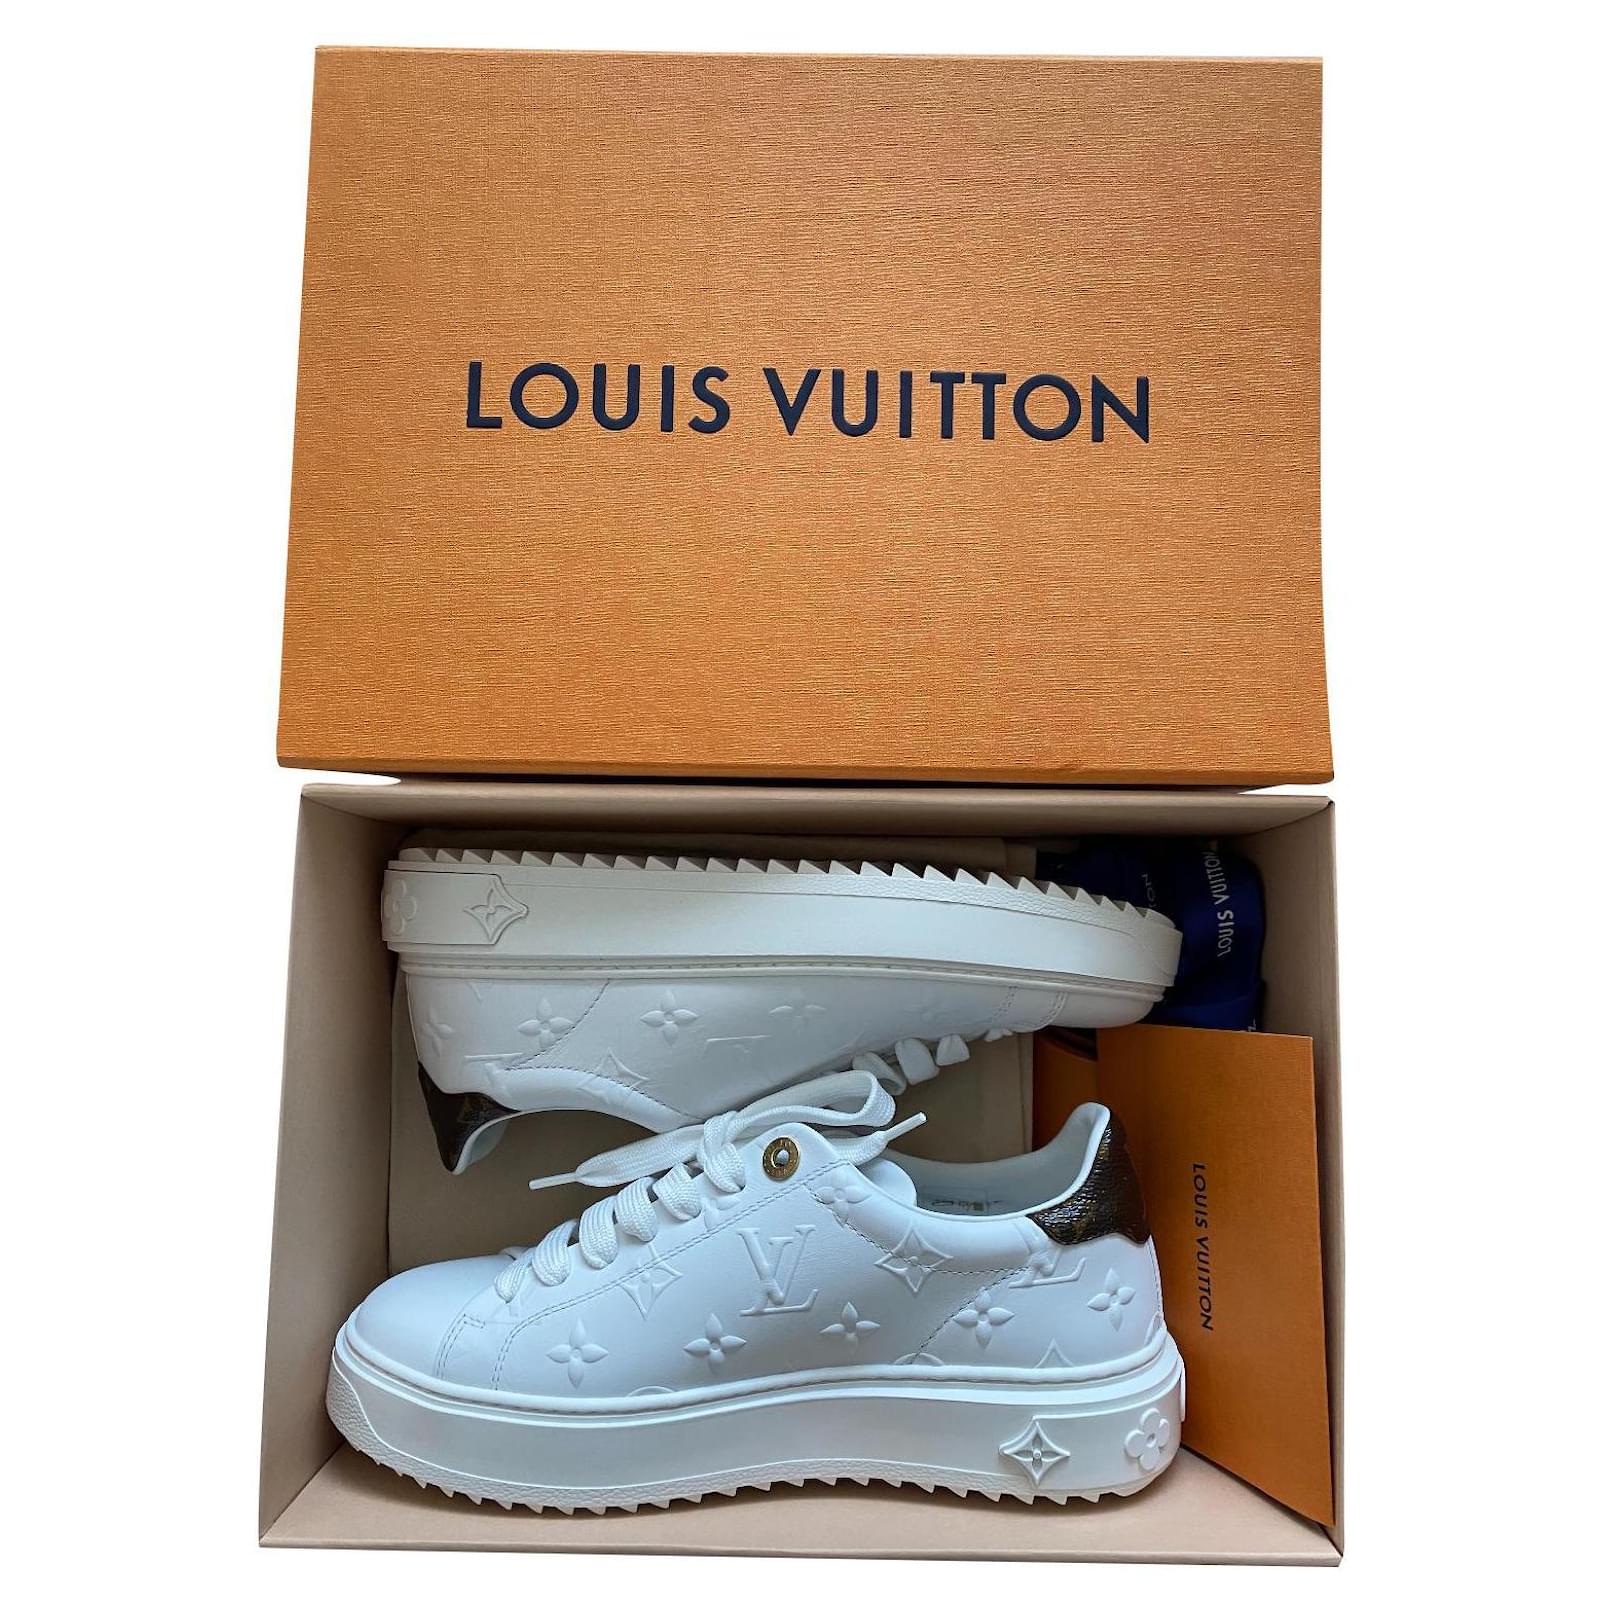 Shop Louis Vuitton Time out sneaker (SNEAKER TIME OUT, 1AAP6J 1AAP6L 1AAP6N  1AAP6O, 1AAP69 1AAP6B 1AAP6D 1AAP6F 1AAP6H) by Mikrie